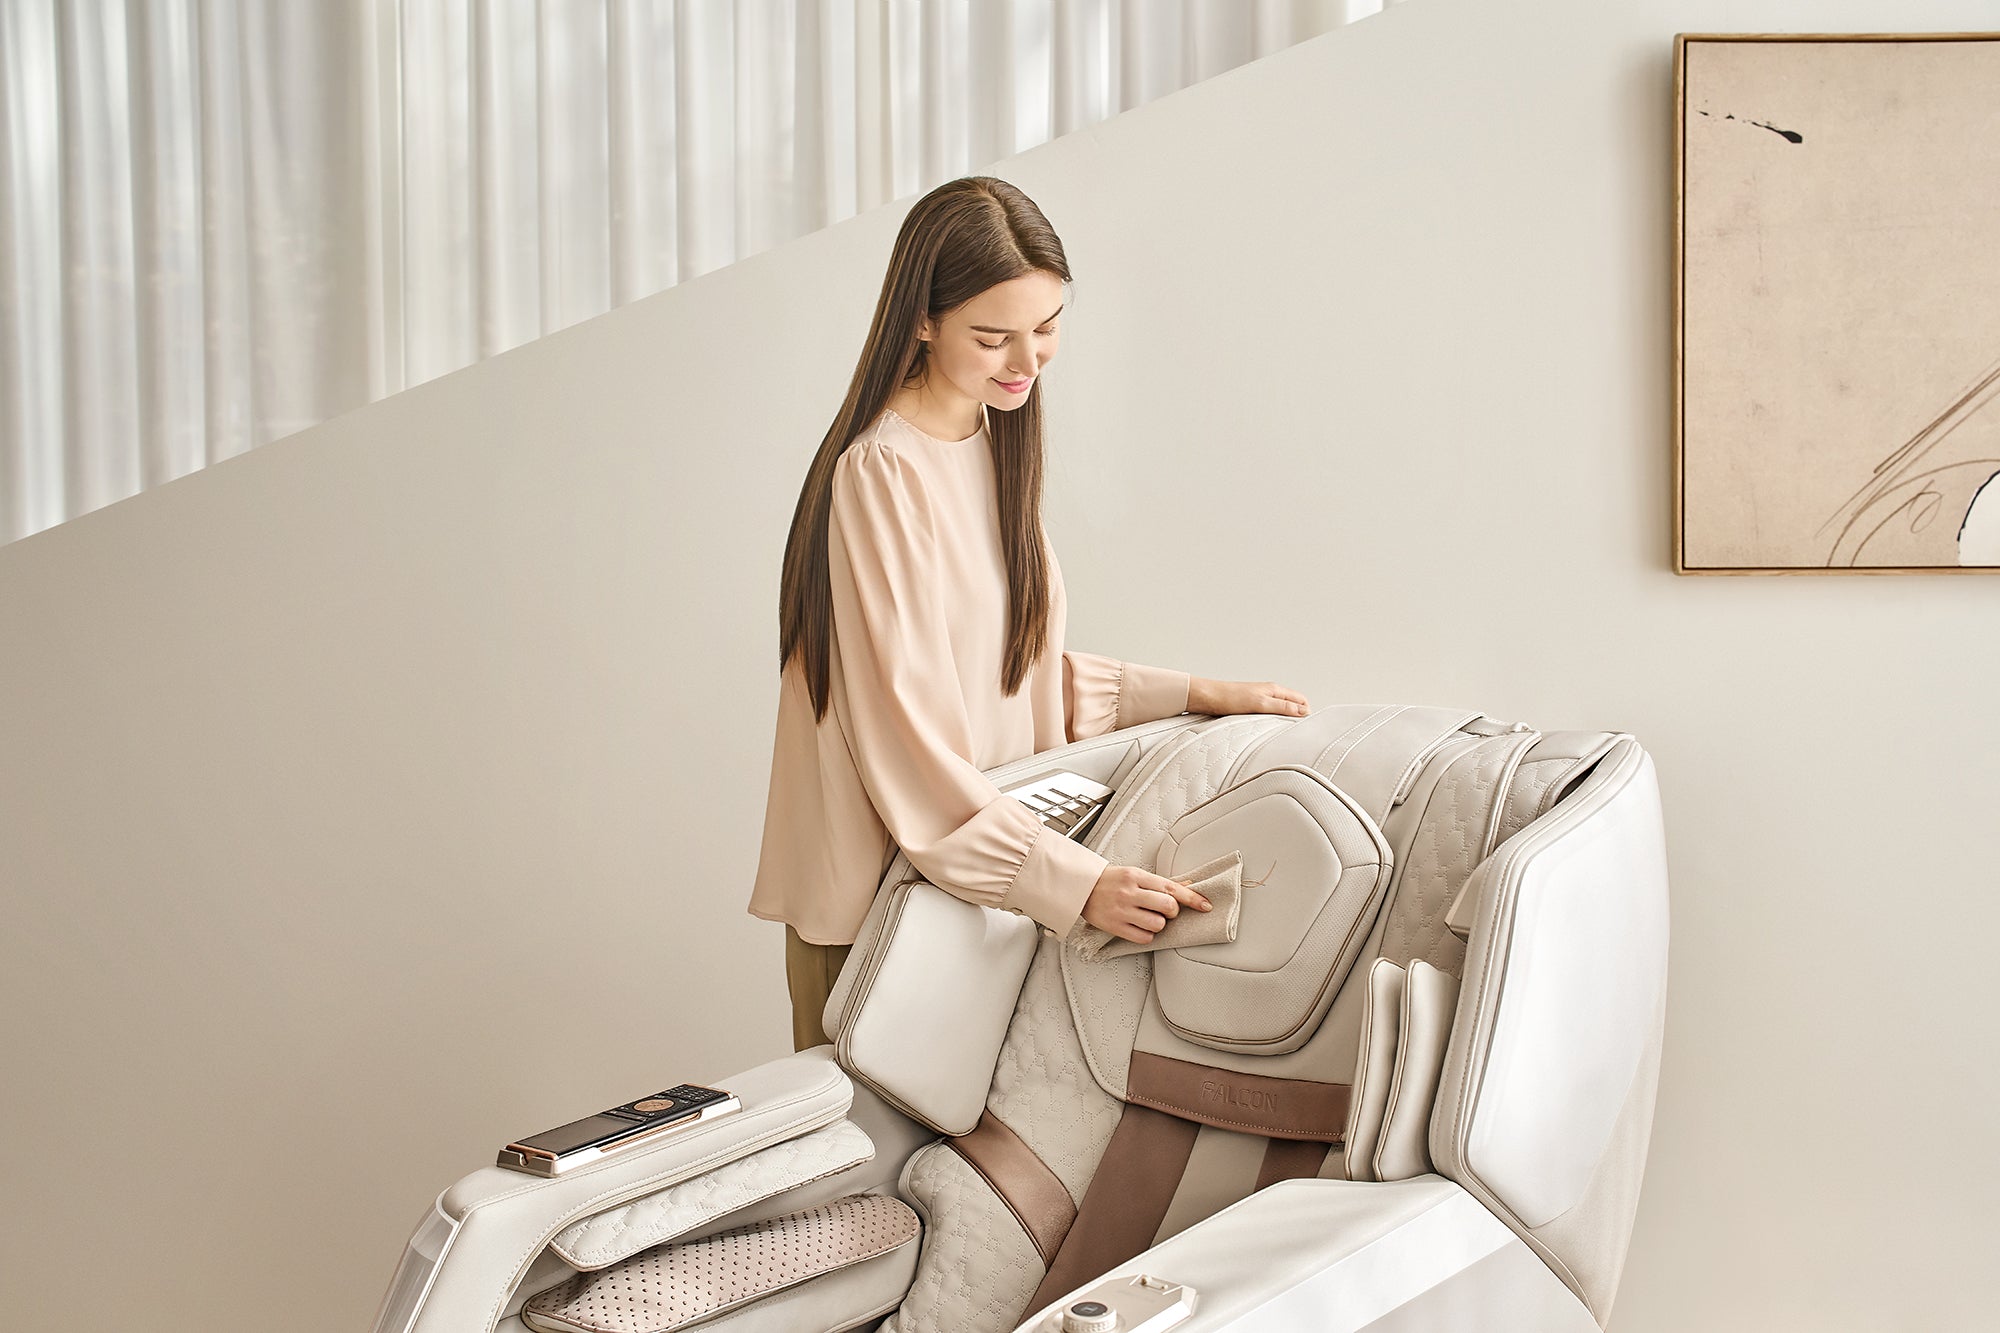 A picture of the Falcon massage chair in a modern living room